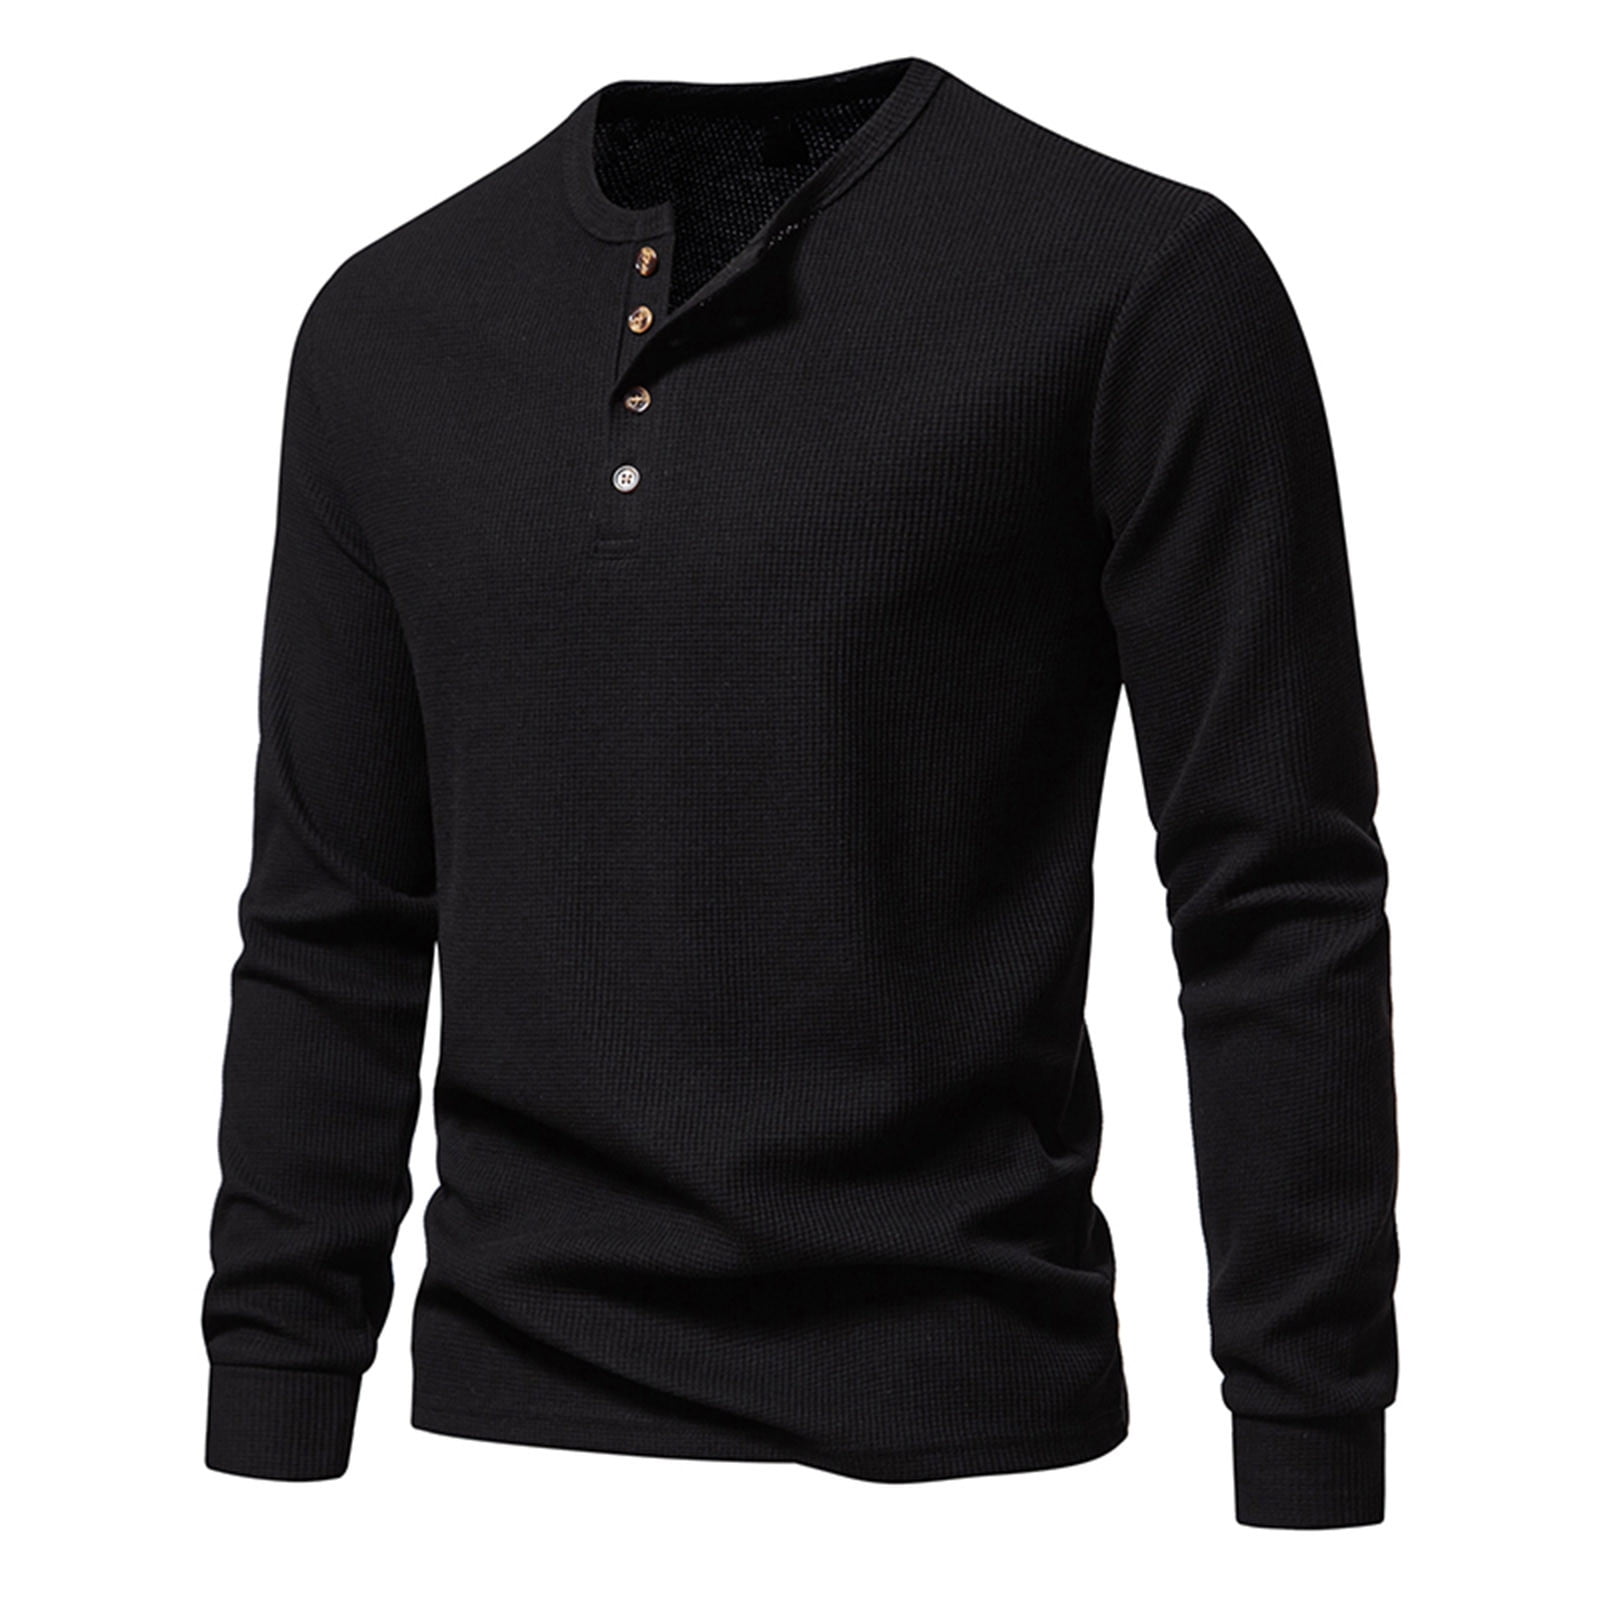 TANQIKE Mens Shirts Casual Pullover Long Sleeve Button Crew Neck Top ...